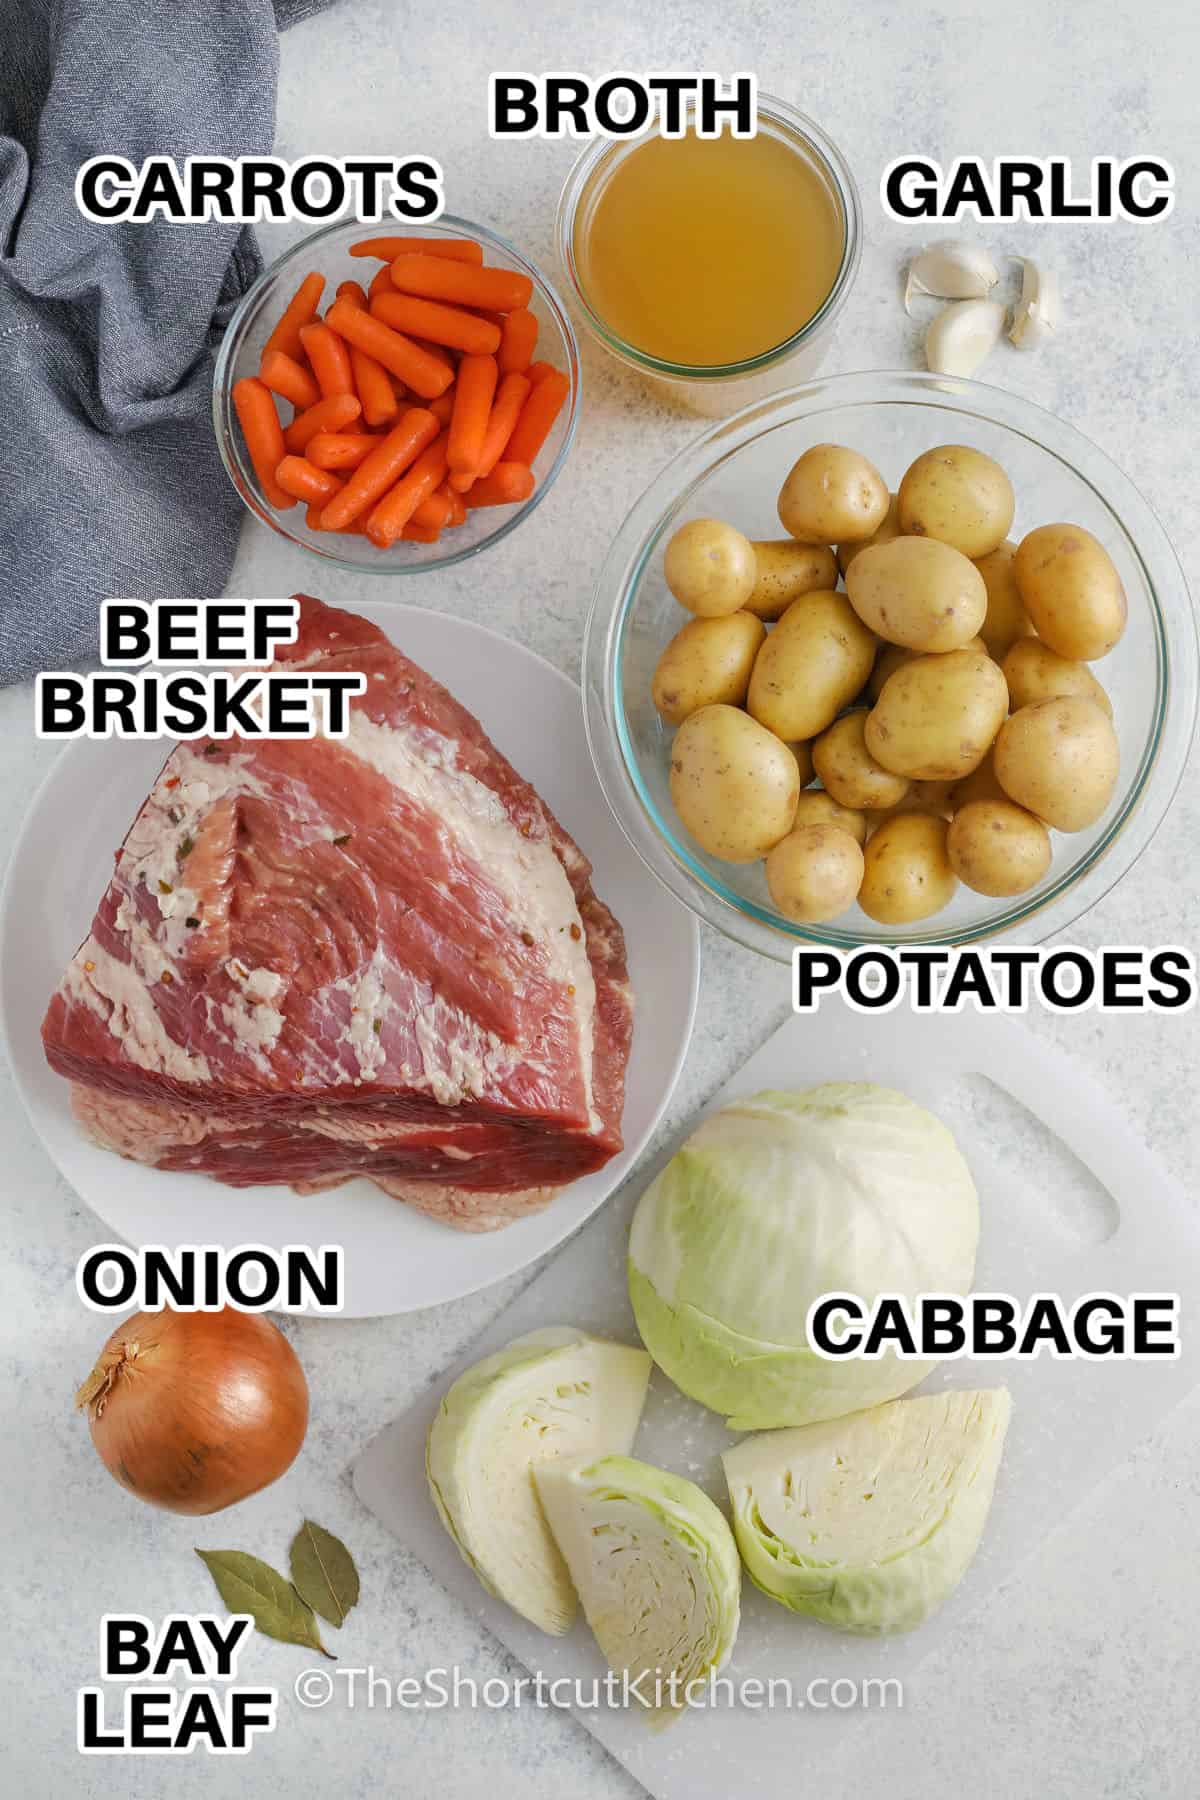 broth , carrots , garlic , potatoes , cabbage , onion , bay leaf with labels to make Crock Pot Corned Beef and Cabbage